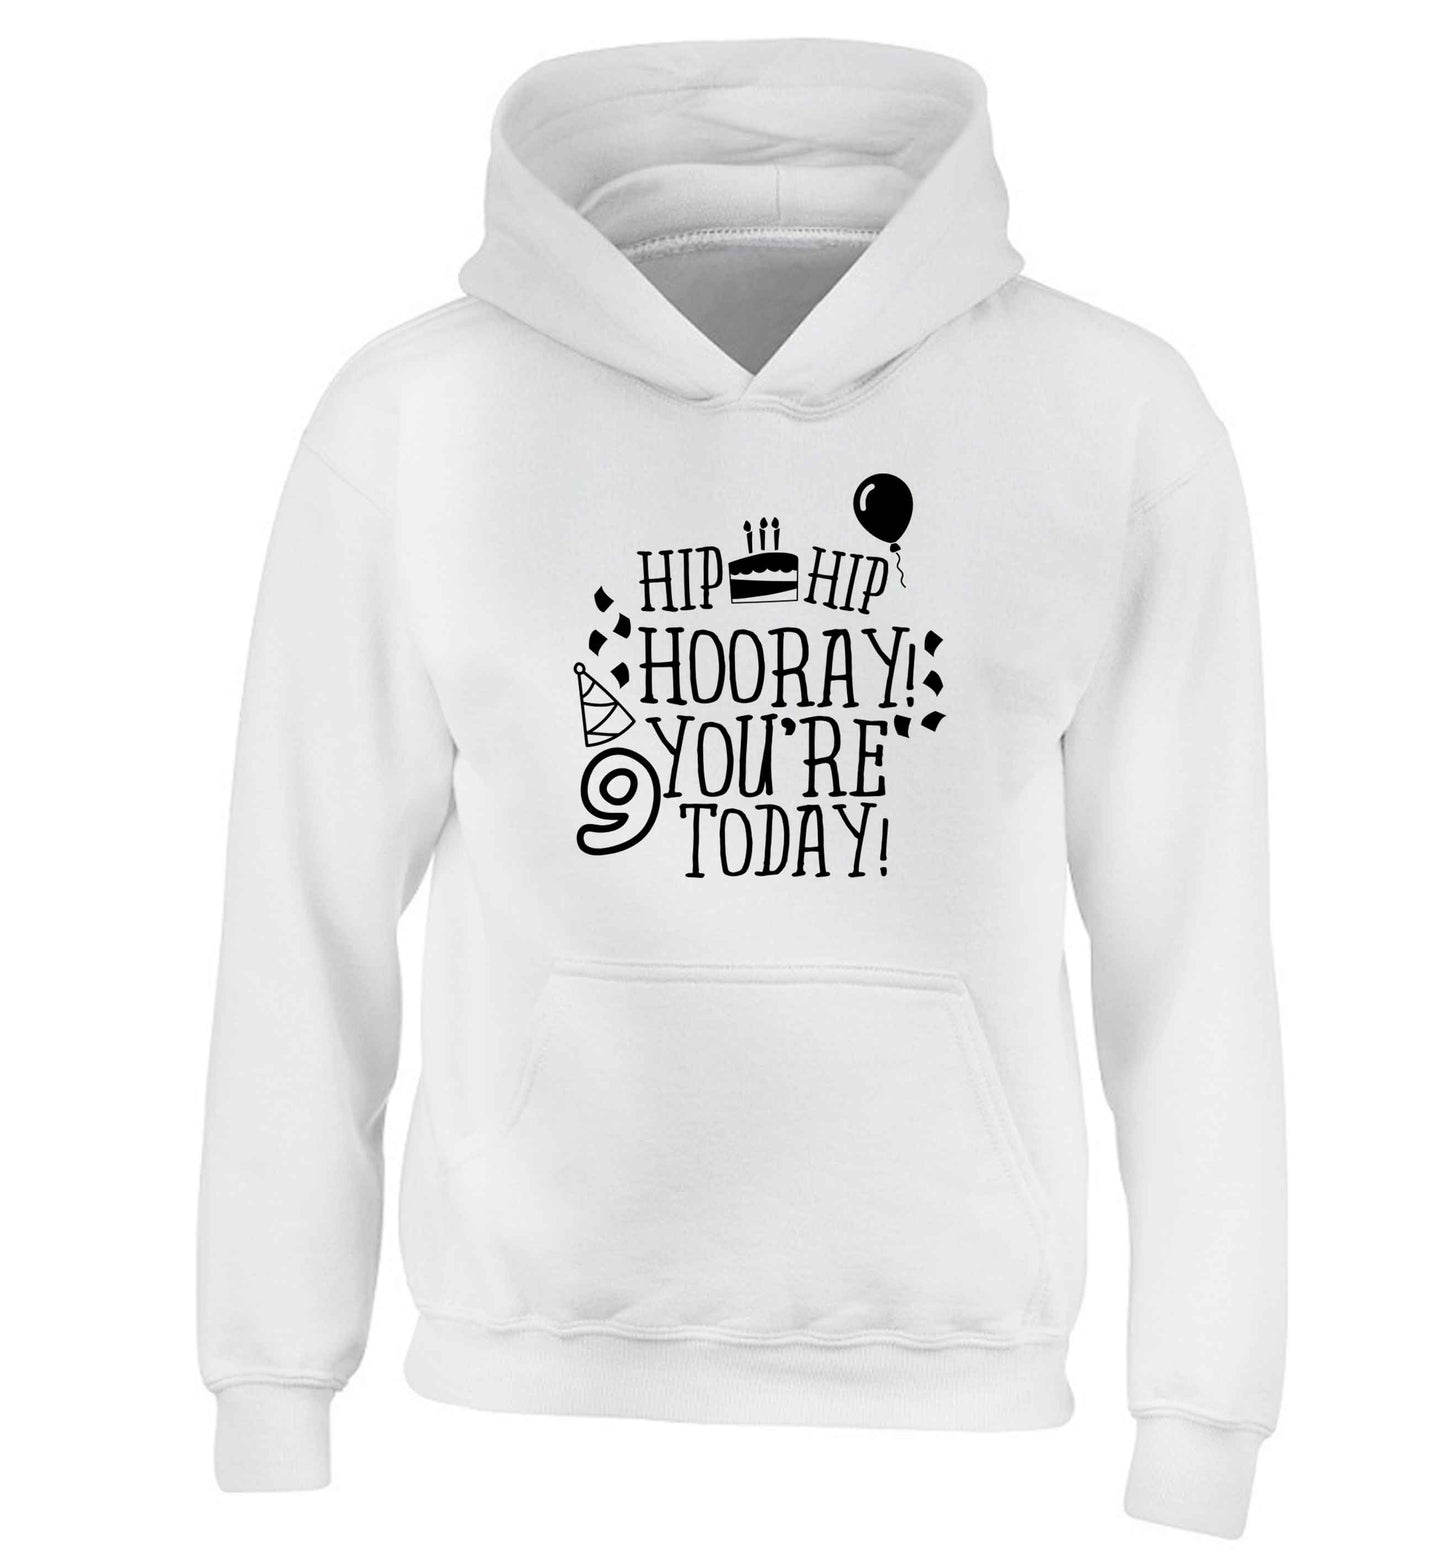 Hip hip hooray you're 9 today! children's white hoodie 12-13 Years